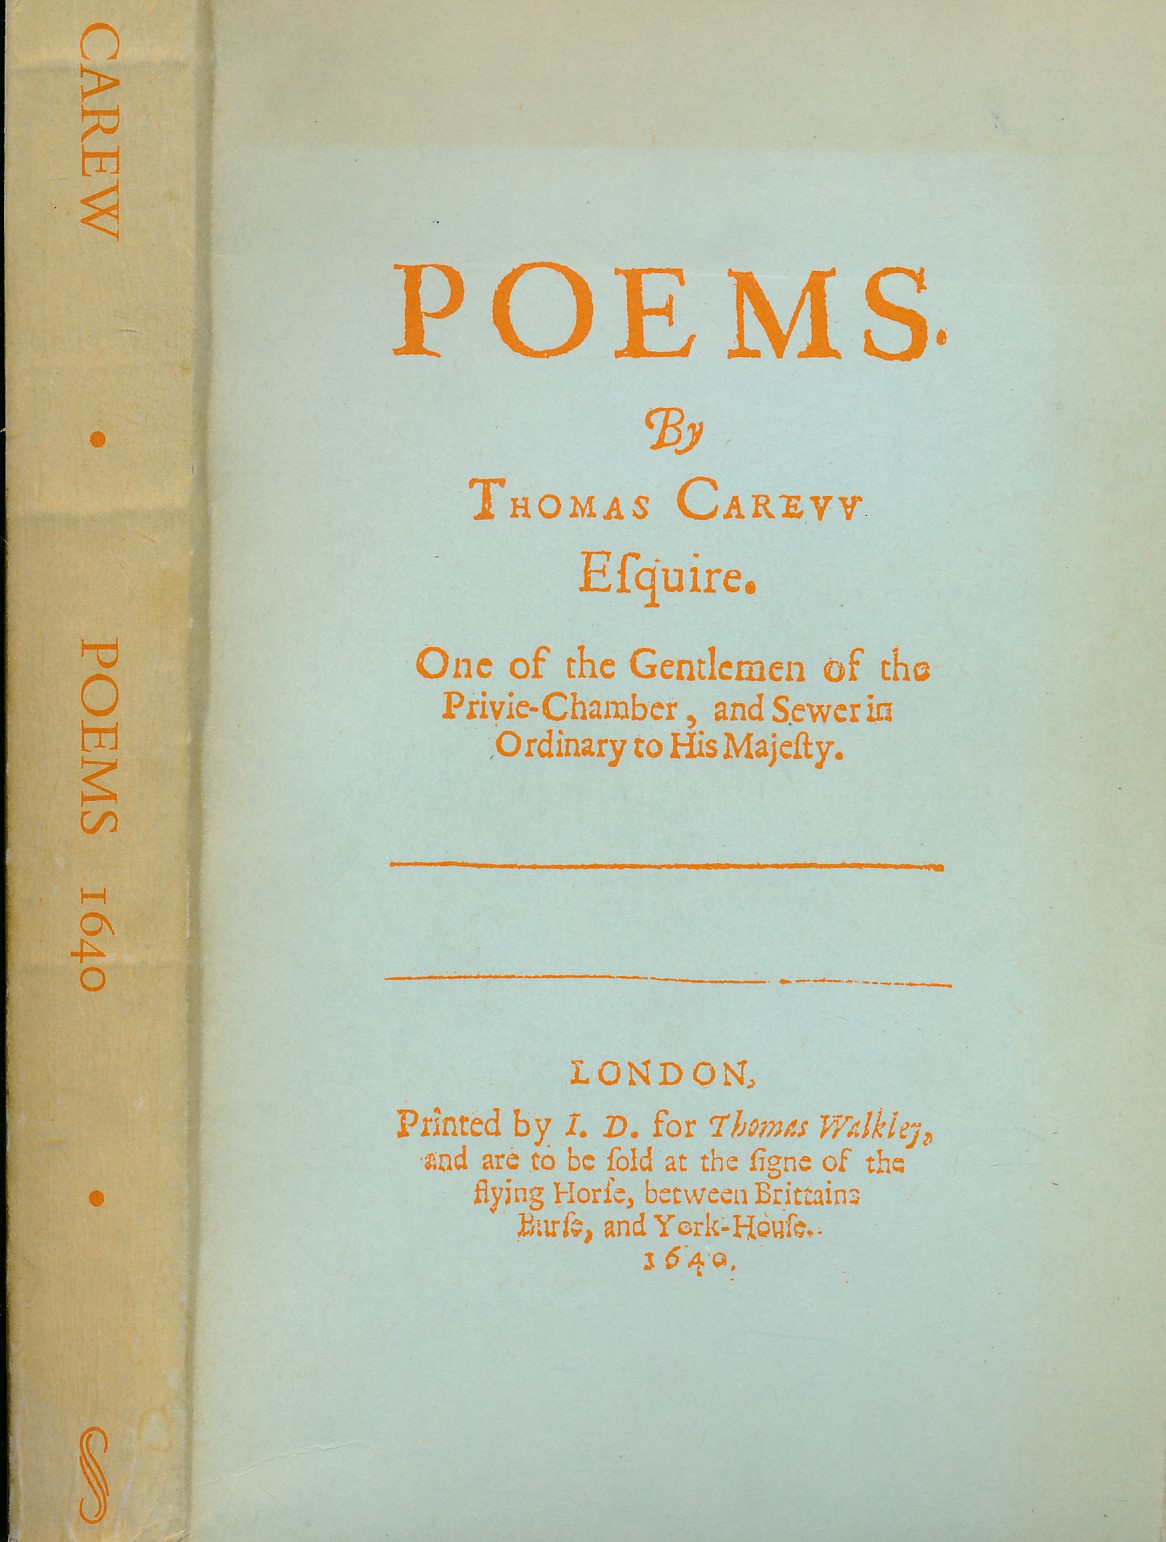 Poems. 1640. Together with Poems from the Wyburd Manuscript.  Facsimile edition.